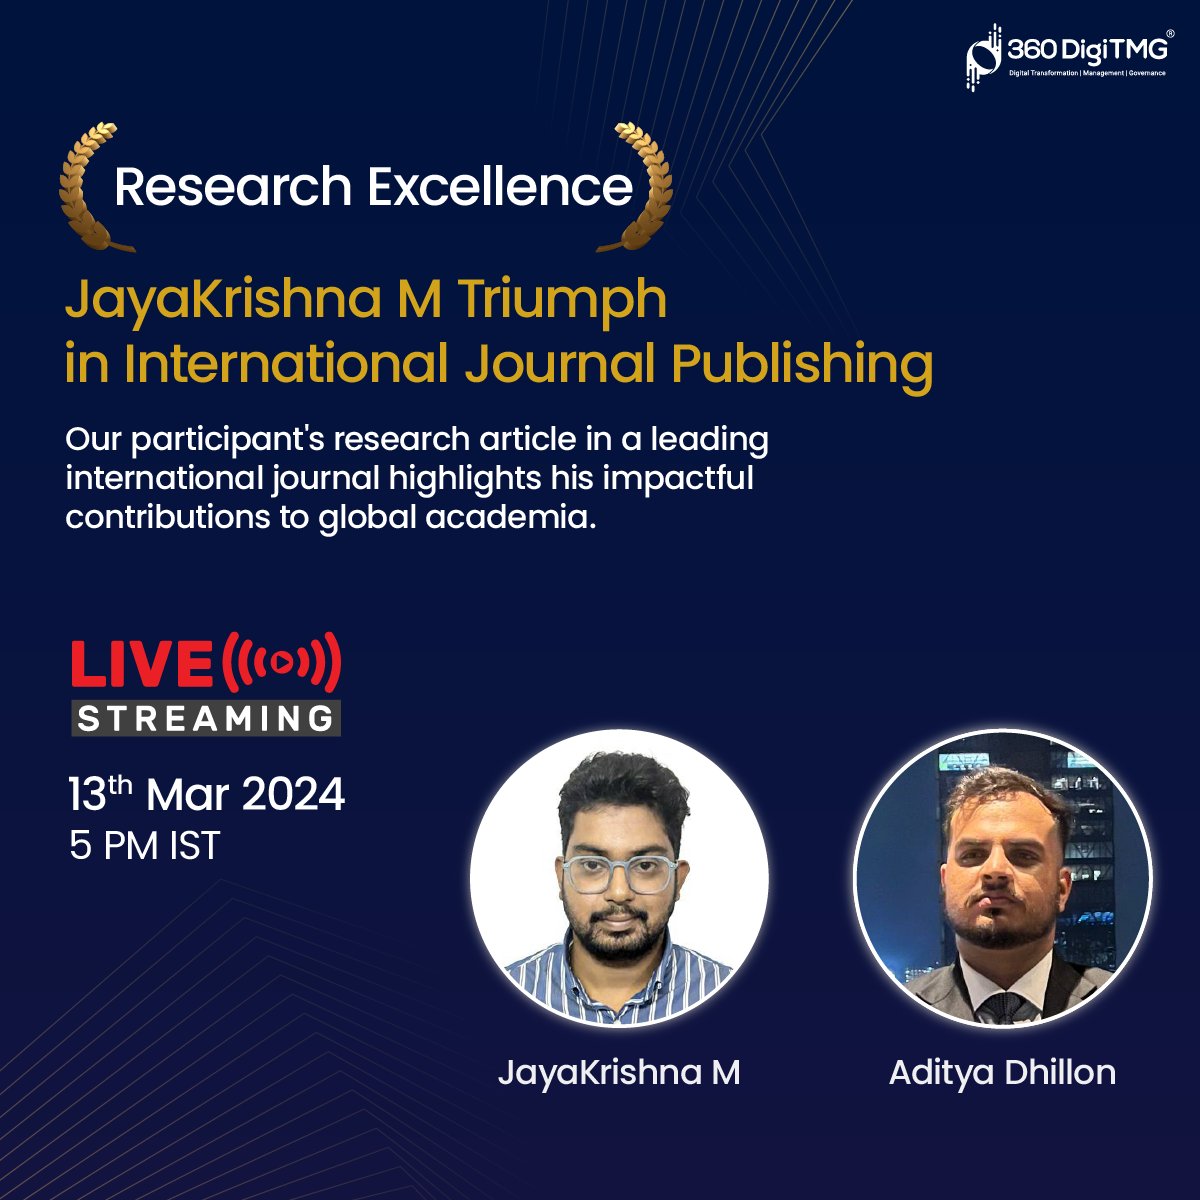 Interview with JayaKrishna M  | International Research Article Publication

Watch Here:
360digitmg.in/article-public…

tinyurl.com/4mxbdh36
Leveraging Artificial Intelligence for Simplified Invoice Automation: PaddleOCR-based Text Extraction from Invoices

#ResearchArticle